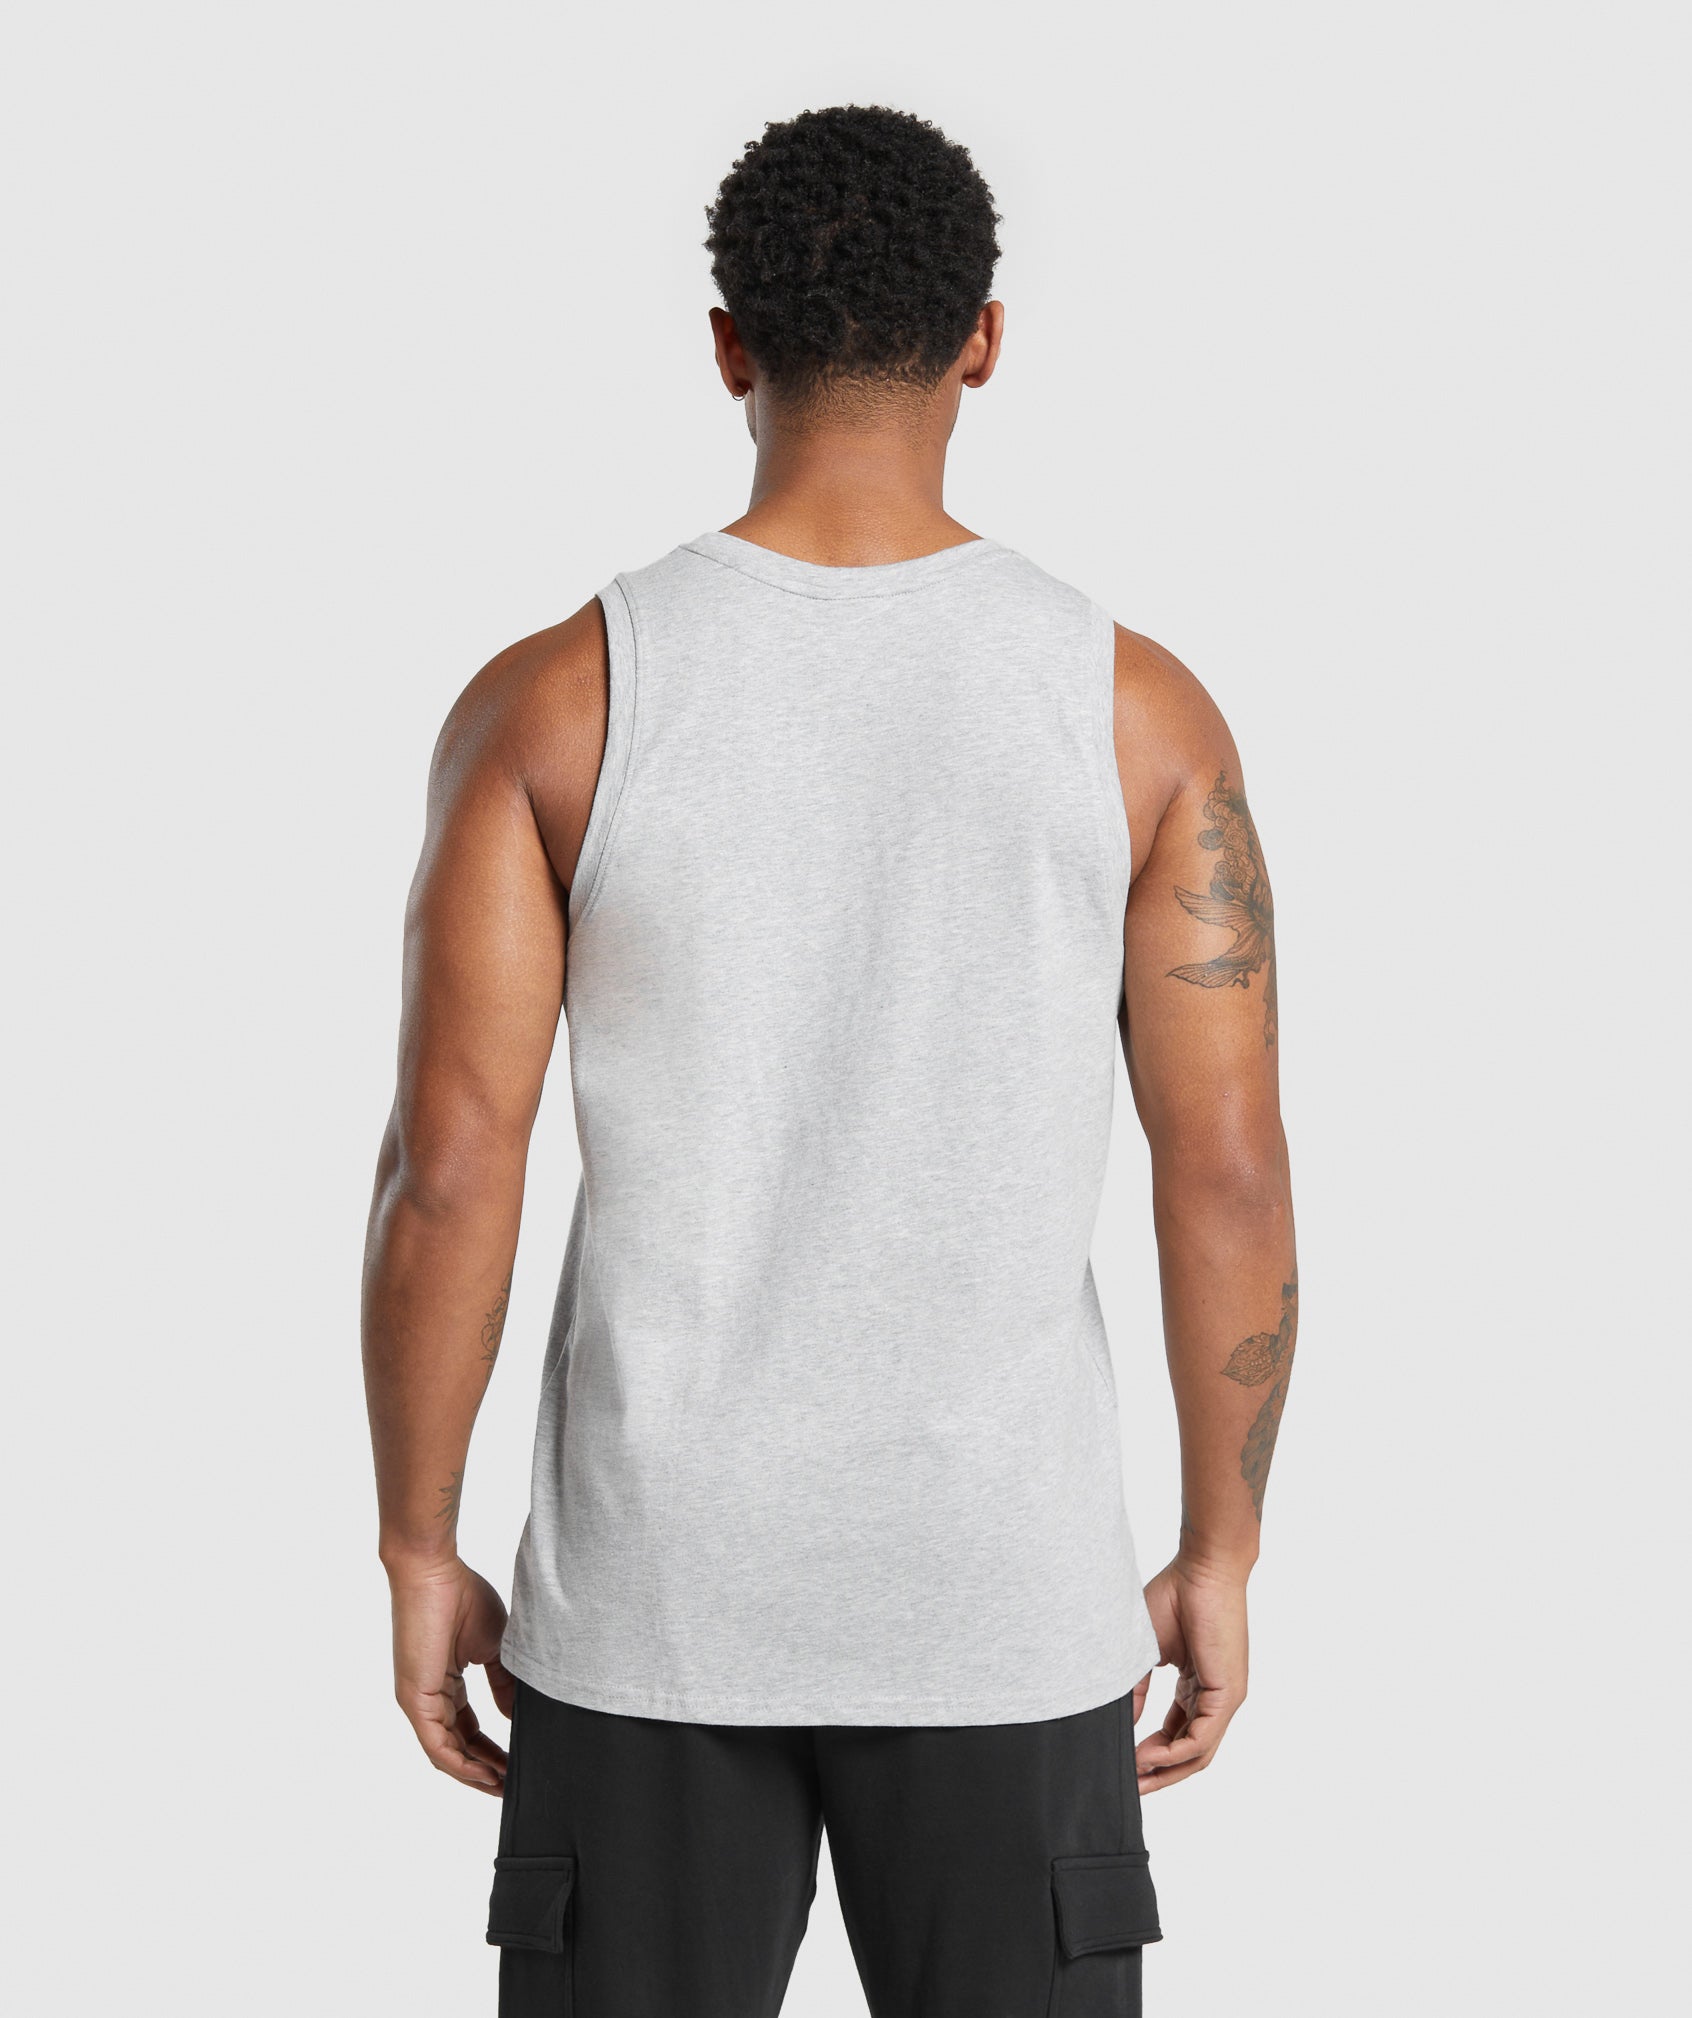 Crest Tank in Light Grey Core Marl - view 2